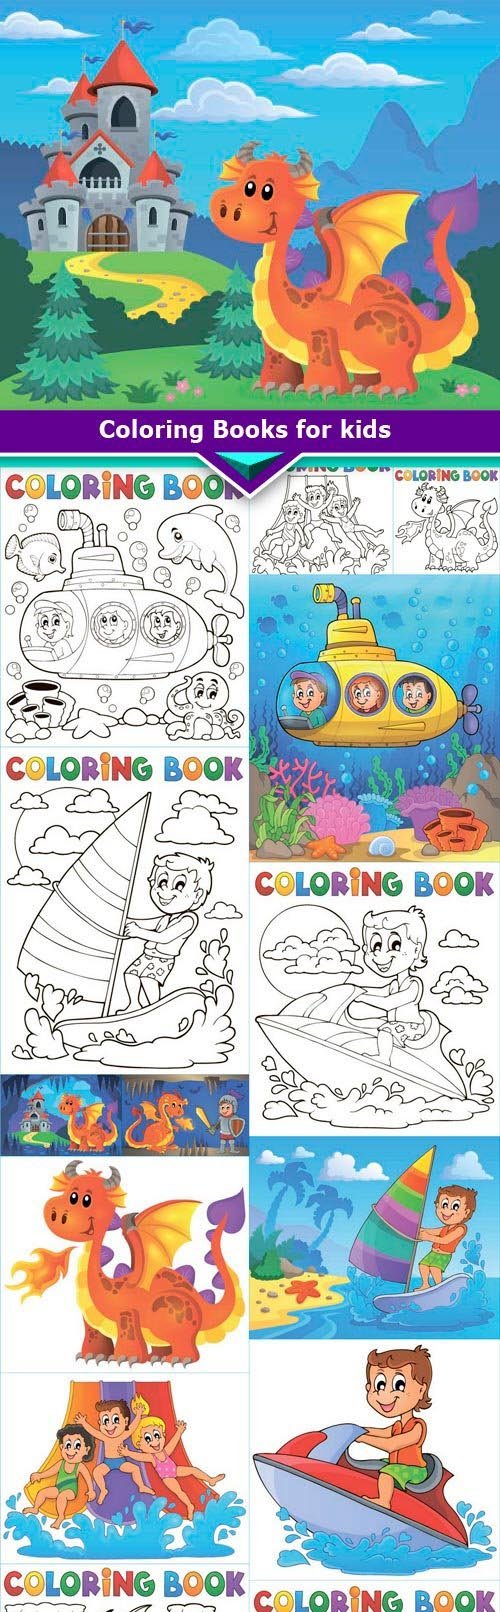 Coloring Books for kids 17x EPS